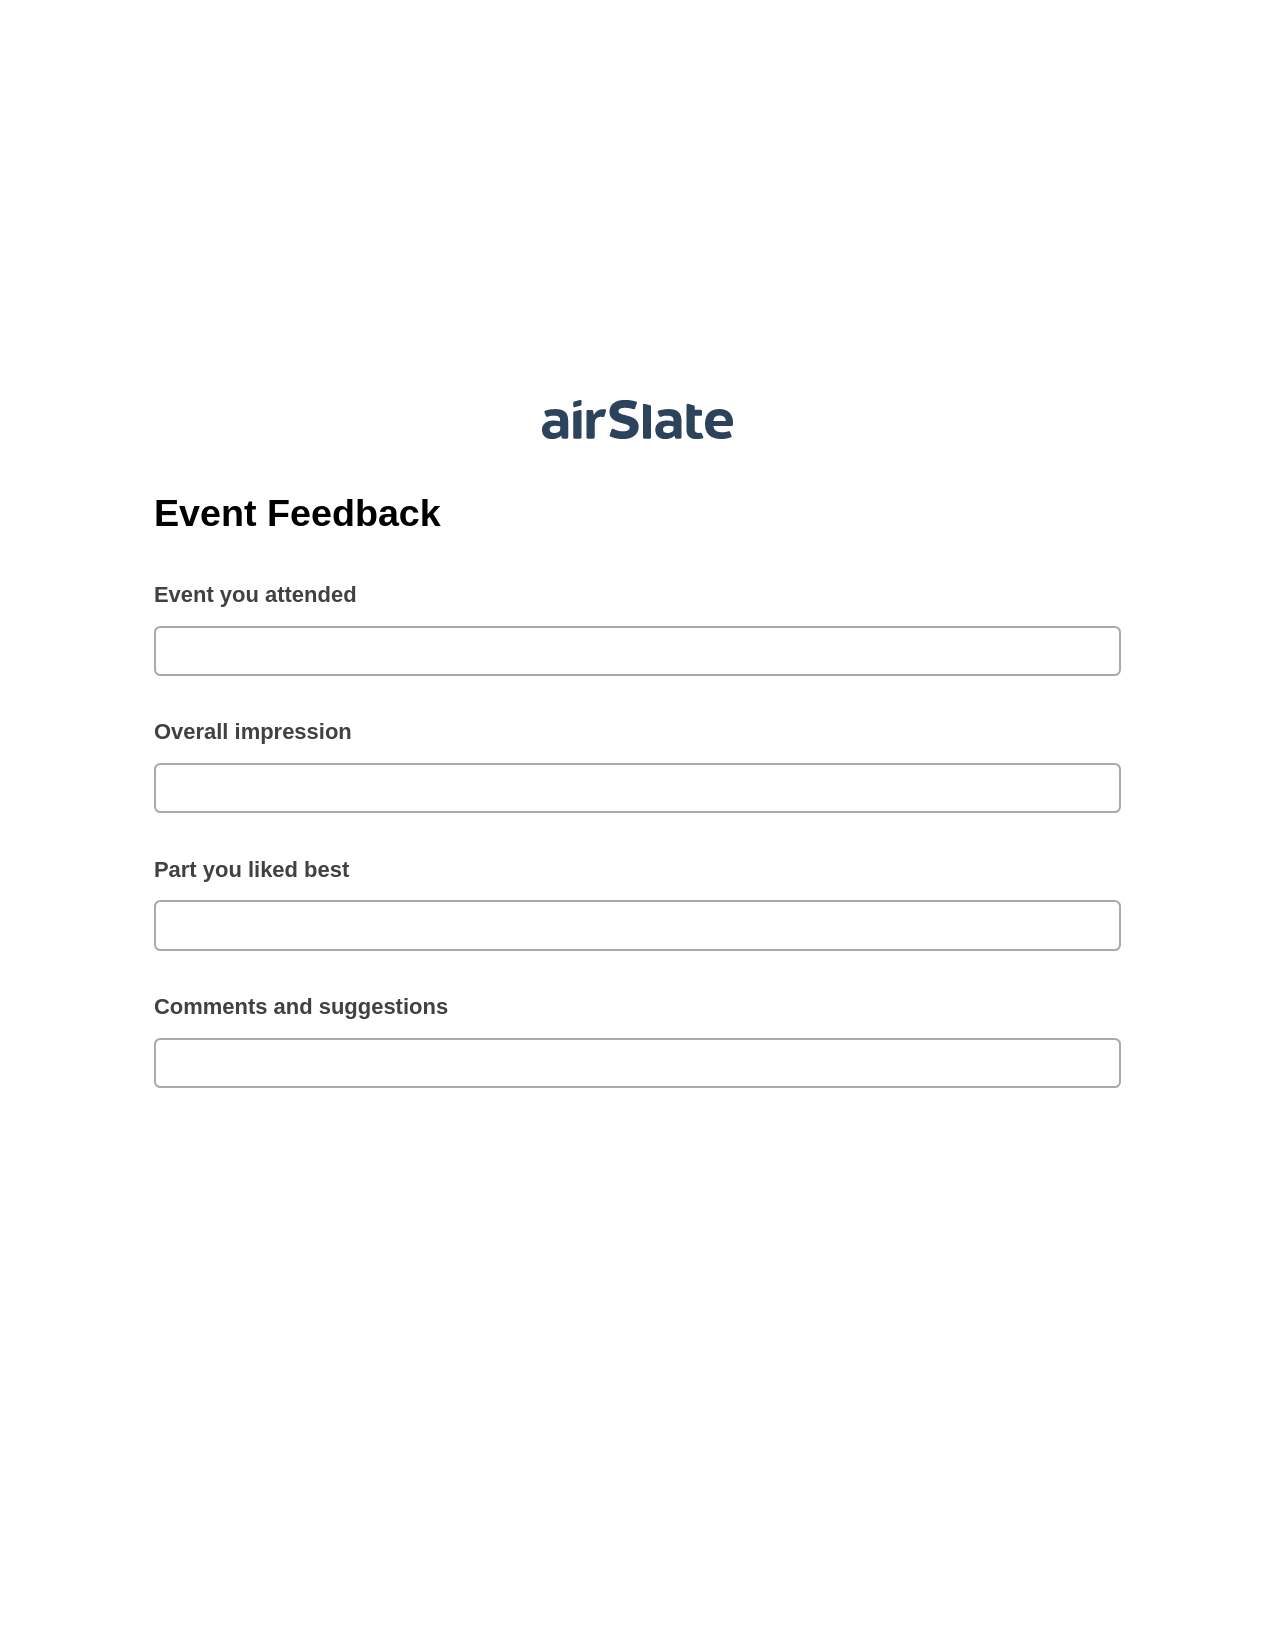 Event Feedback Pre-fill from Salesforce Record Bot, Create NetSuite Records Bot, Archive to SharePoint Folder Bot